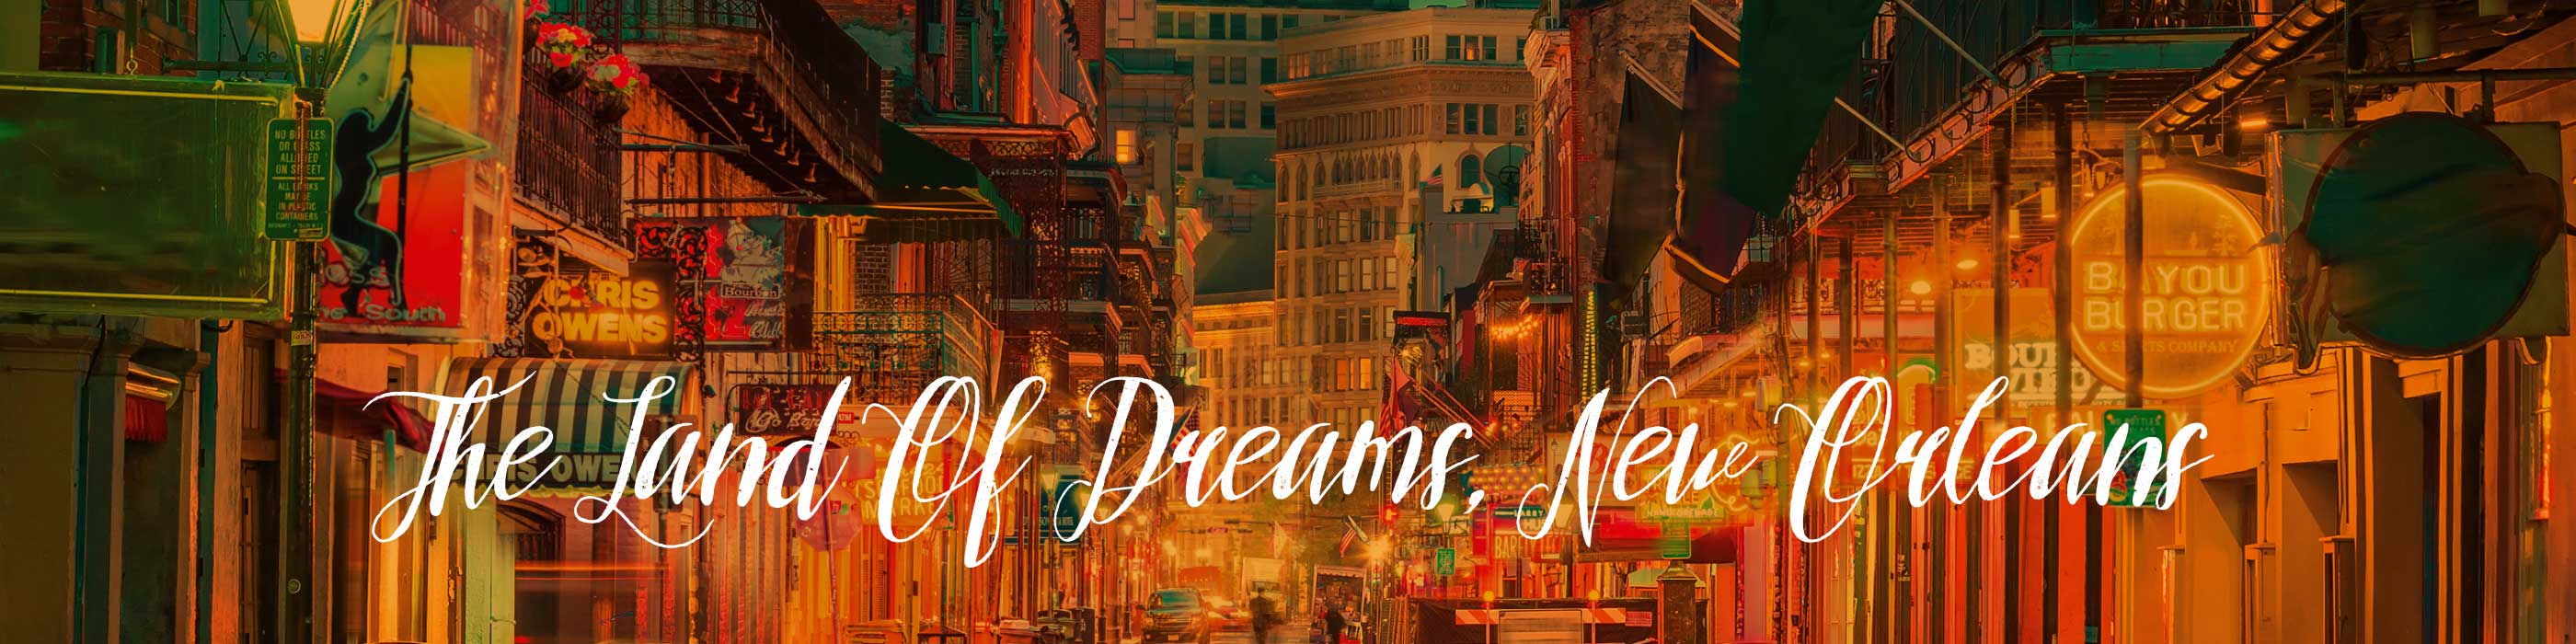 The Land of Dreams New Orleans